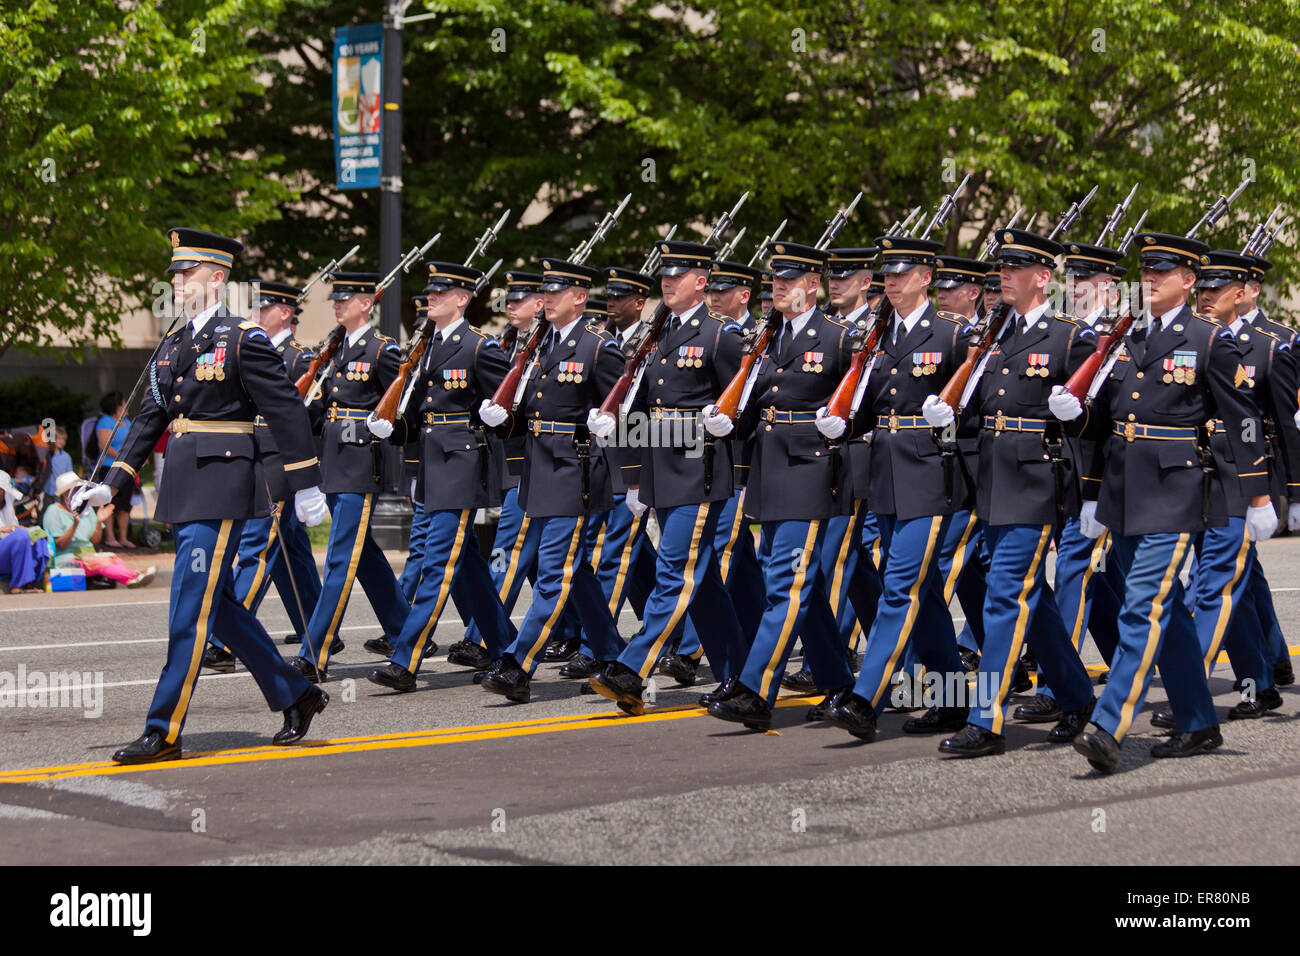 US Army honor guard drill team marching in Memorial Day parade - Washington, DC USA Stock Photo